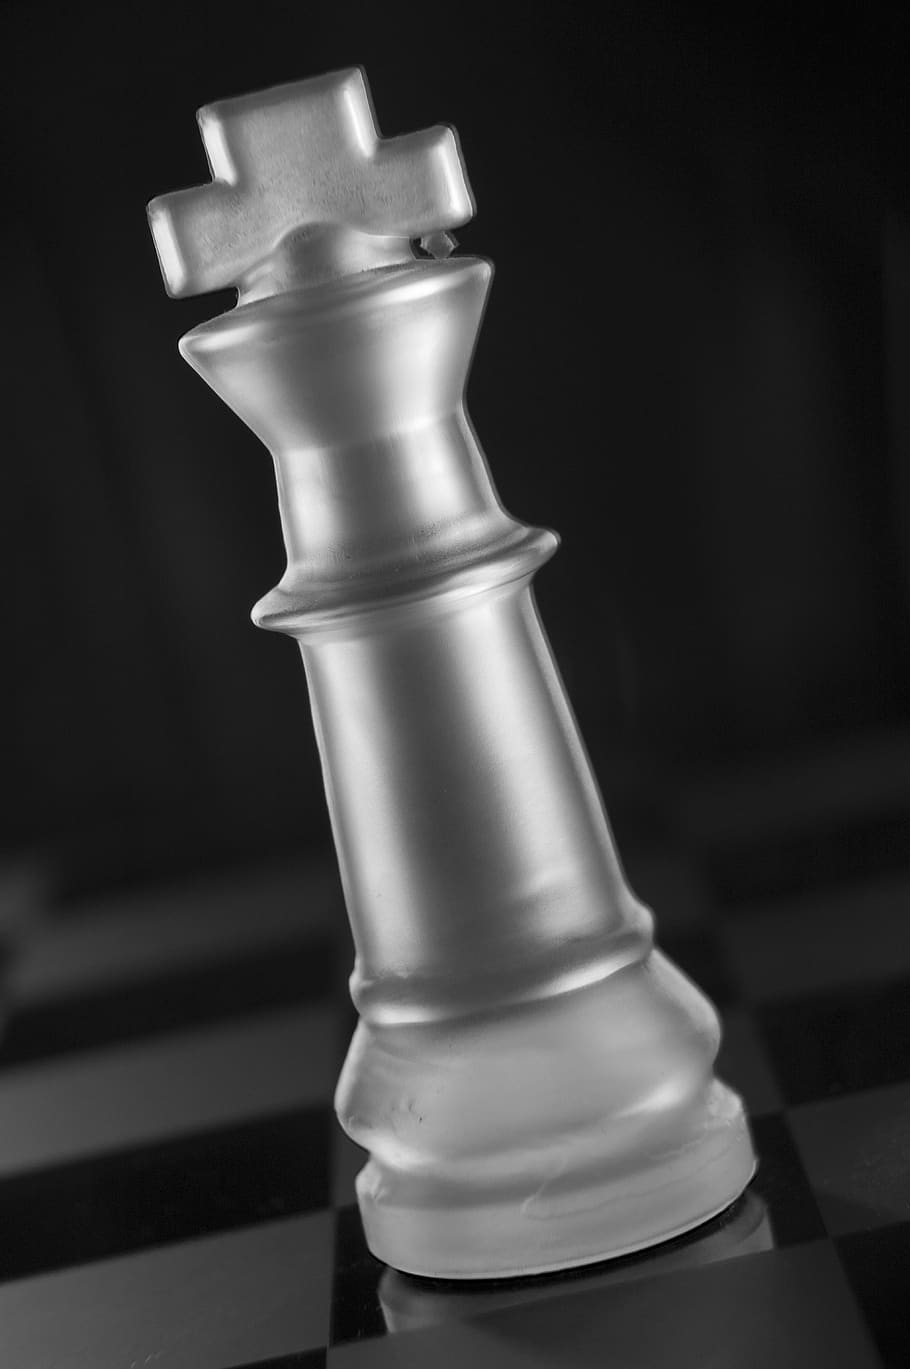 chess, victory, checkmate, king, chessboard, strategy, crown, chess piece, game, board game